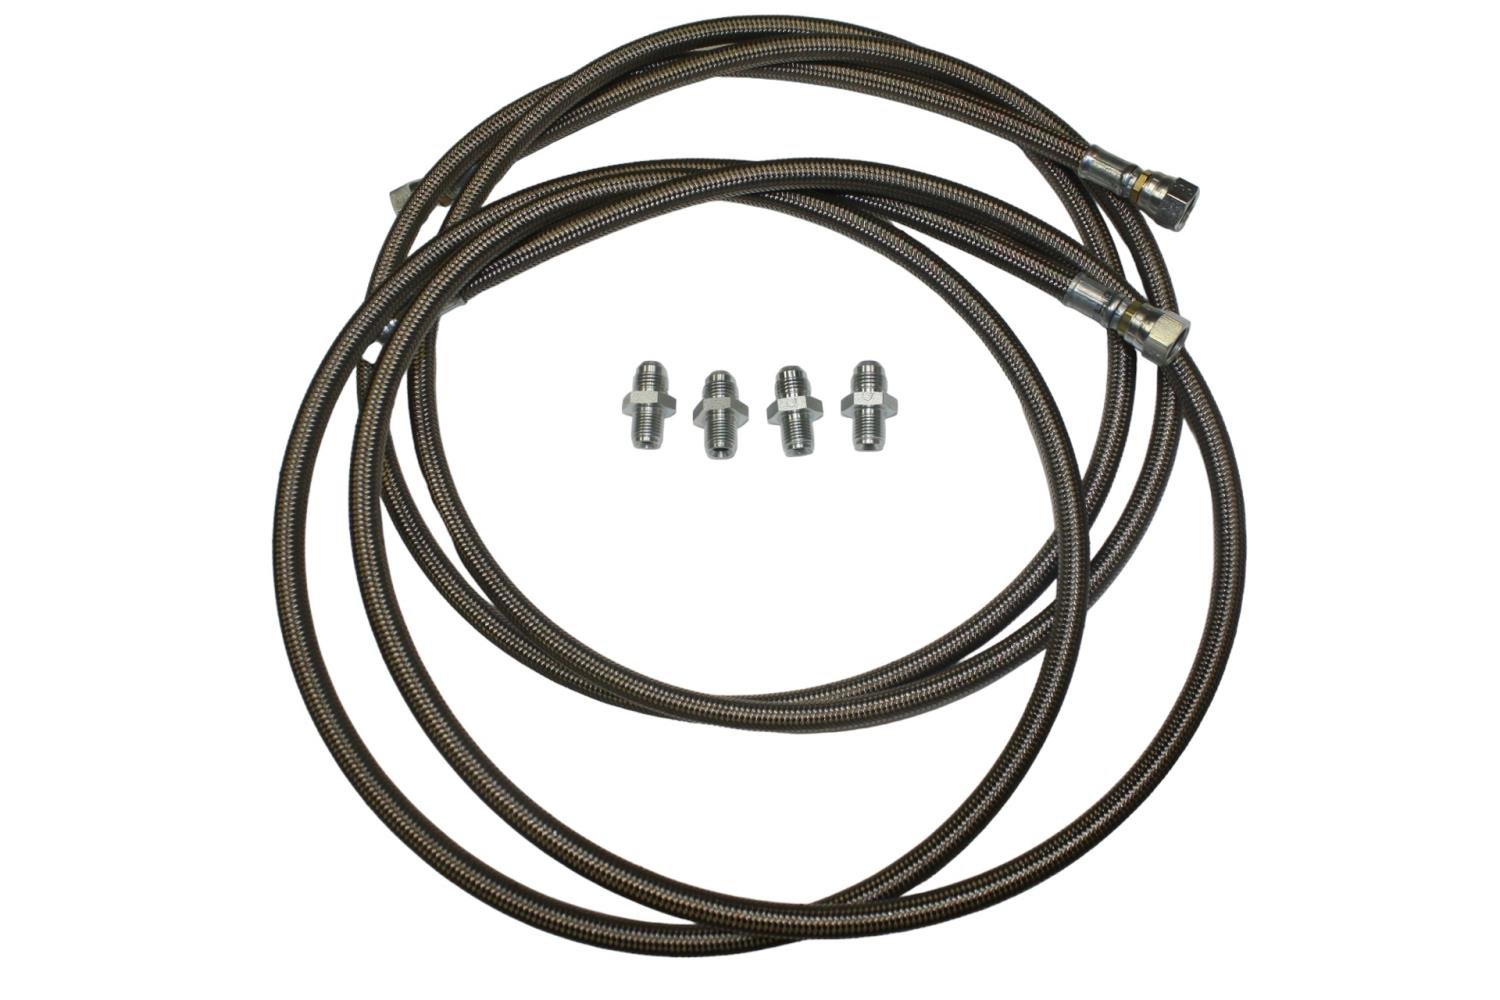 23-1501 Automatic Transmission Cooler Lines for TH350, TH400,